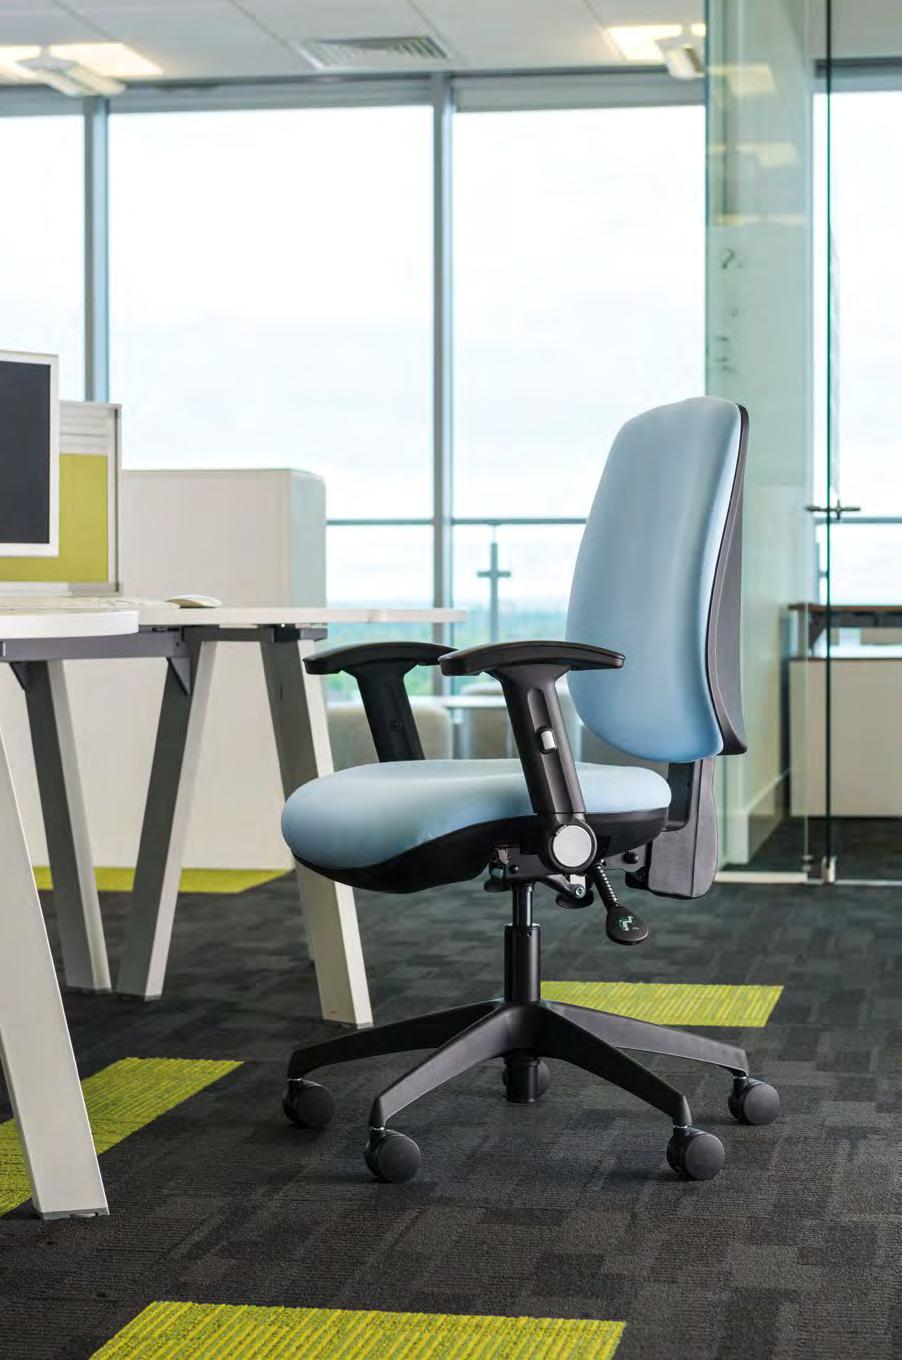 A cantilever visitor chair completes the range. Fusion is part of our ERGO+ ergonomic and backcare range, endorsed by a leading Chartered Physiotherapist.